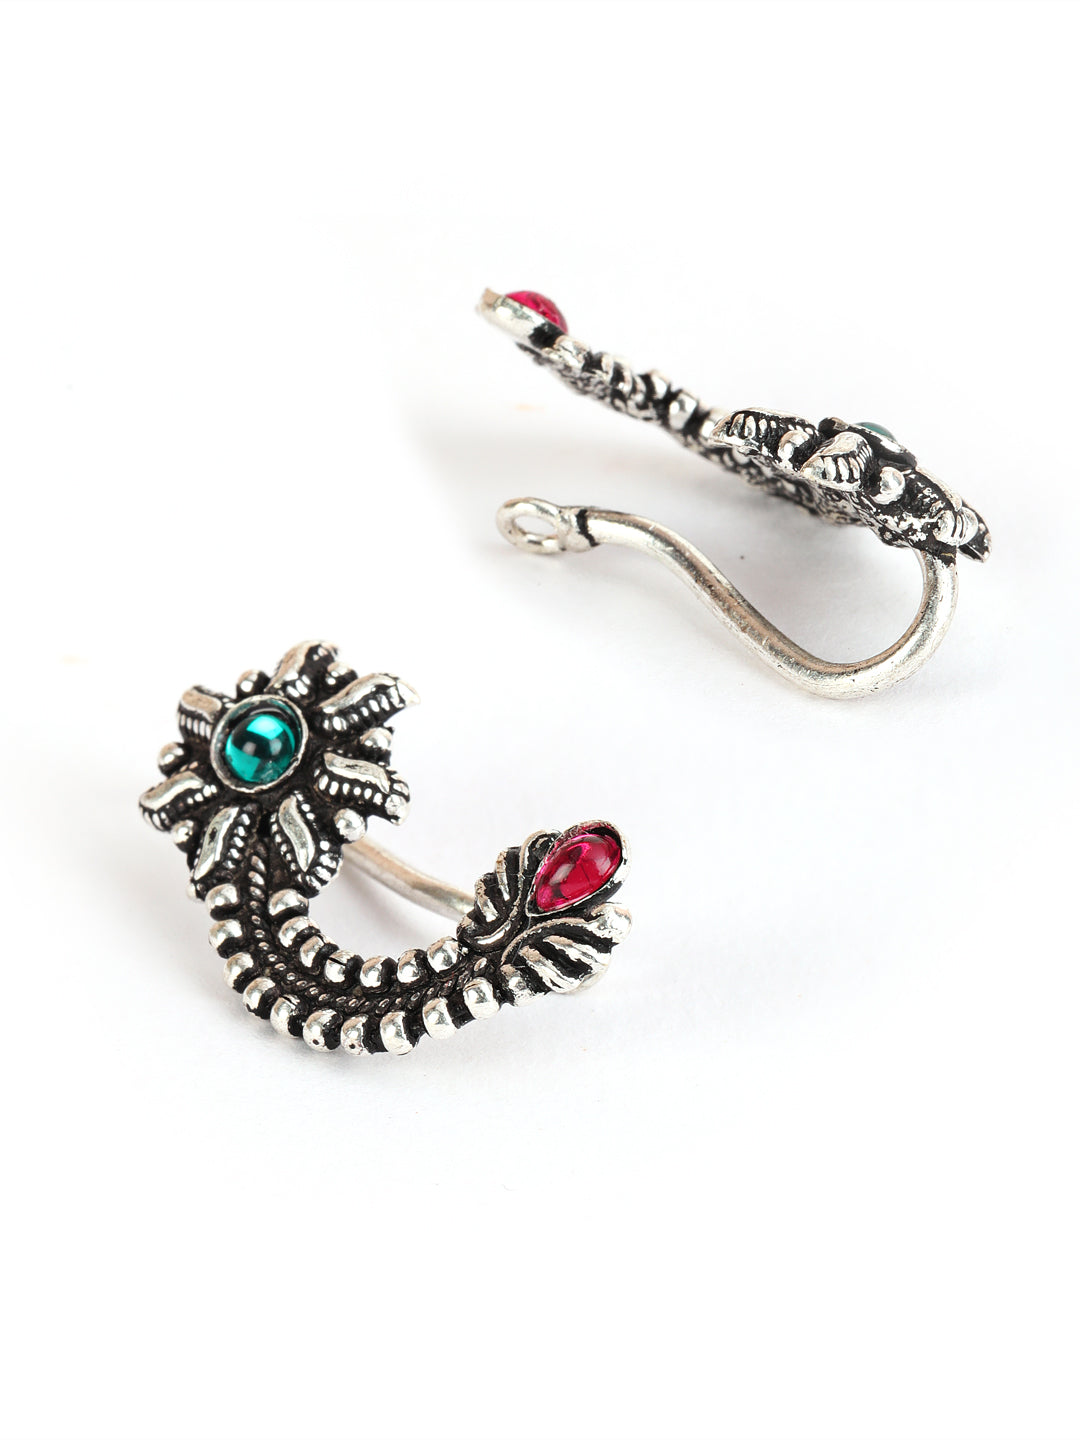 Oxidized Silver-Plated Nose Pins - Jazzandsizzle